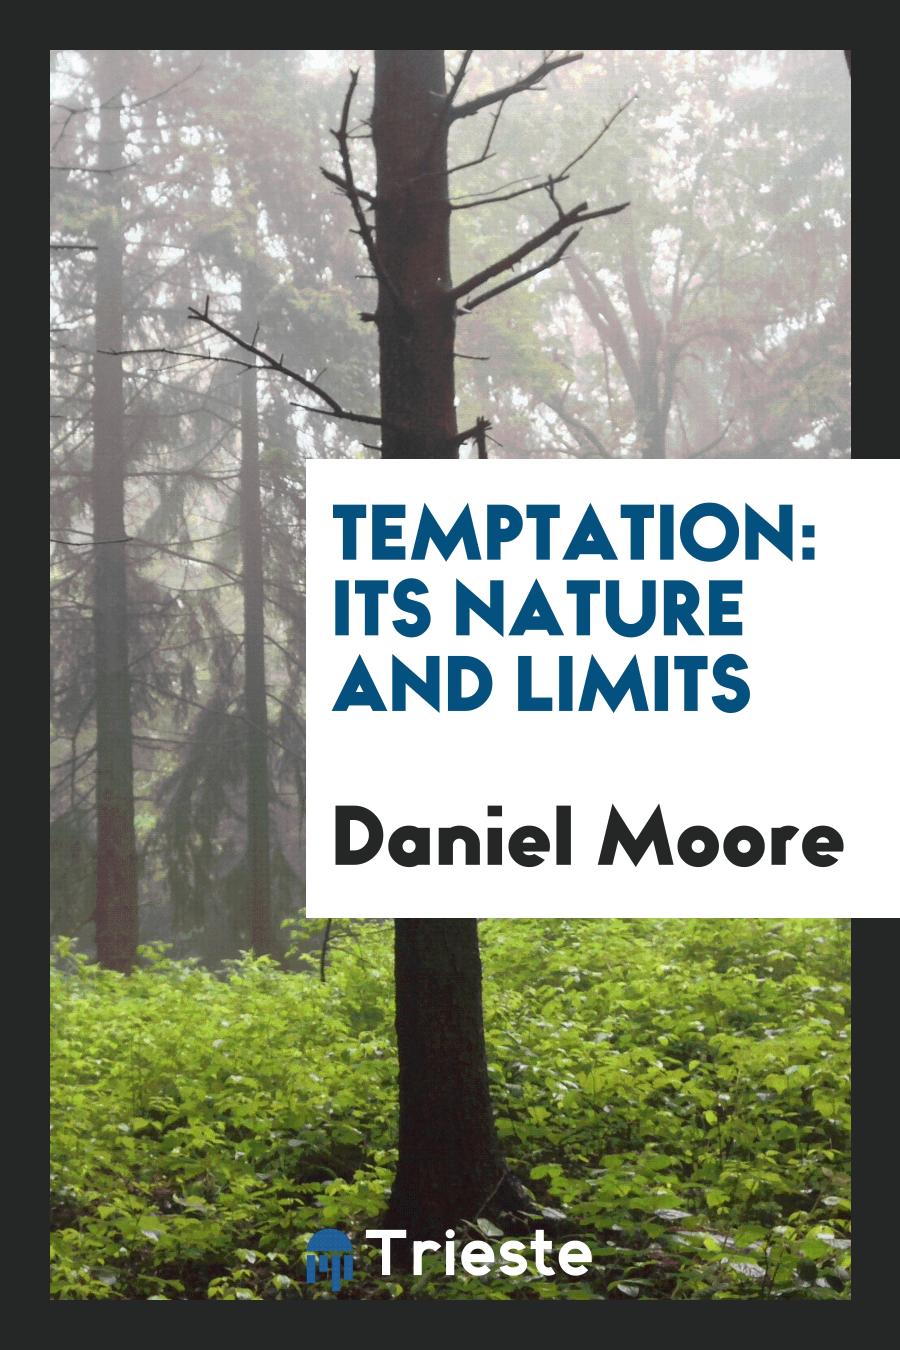 Temptation: Its Nature and Limits